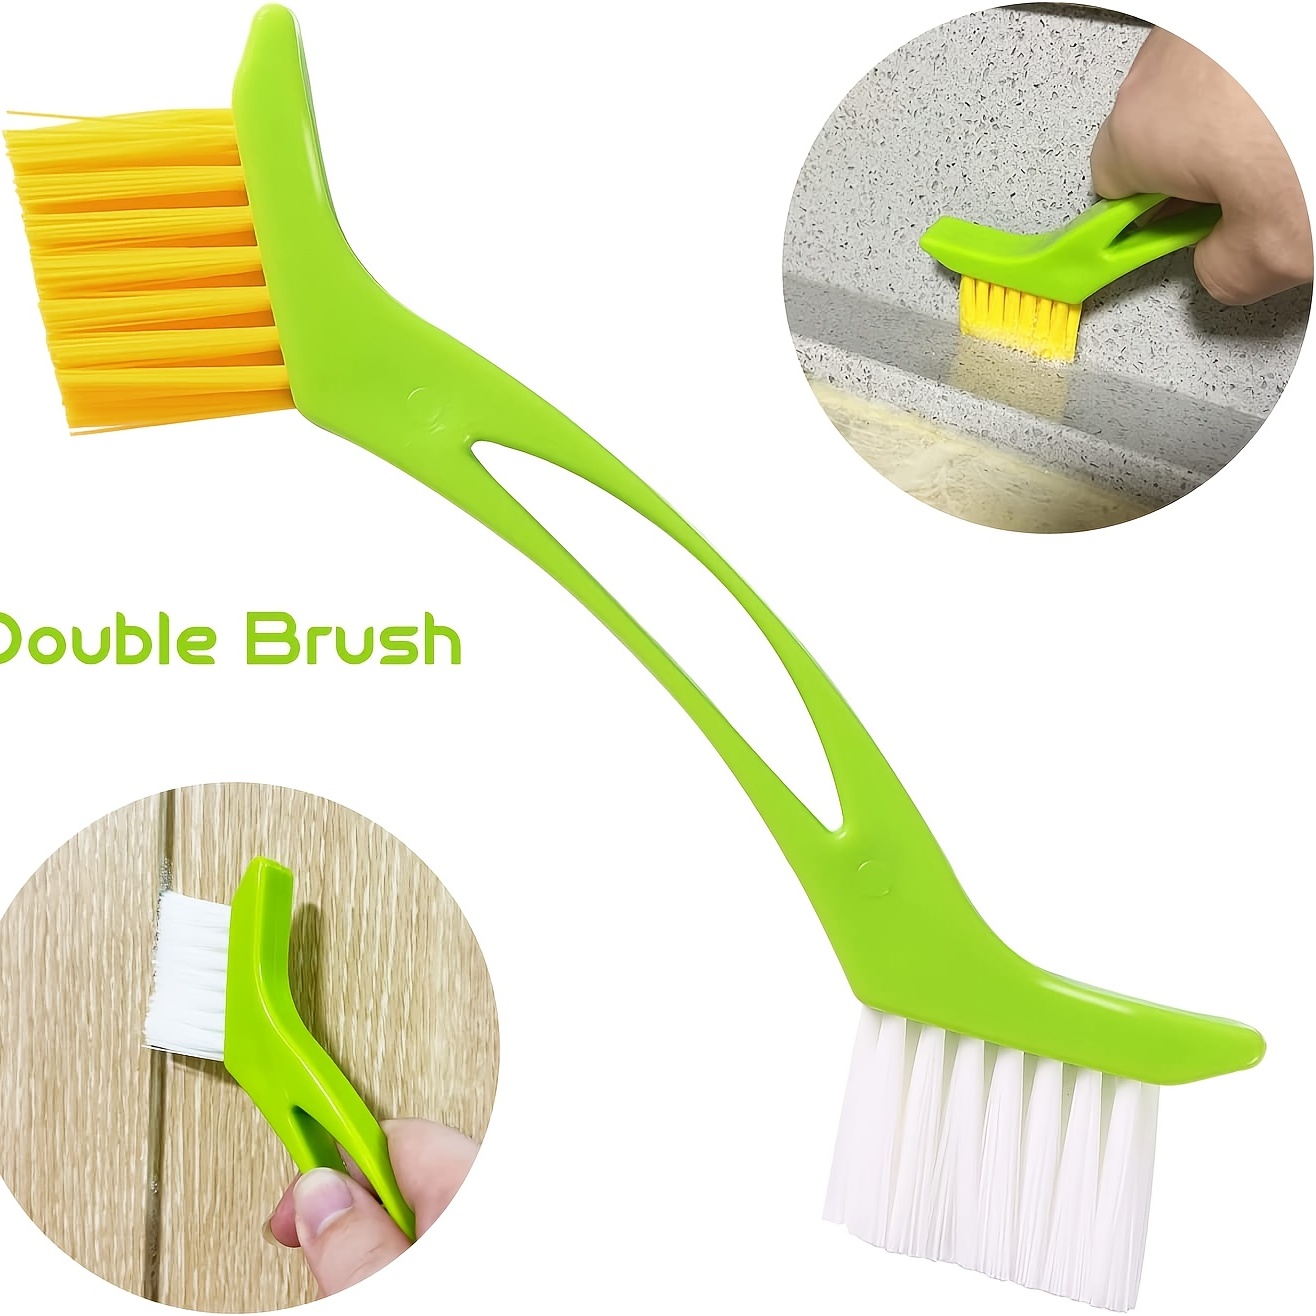 Grout Brush, Grout Cleaner Brush, Tile Joint Scrub Brush With